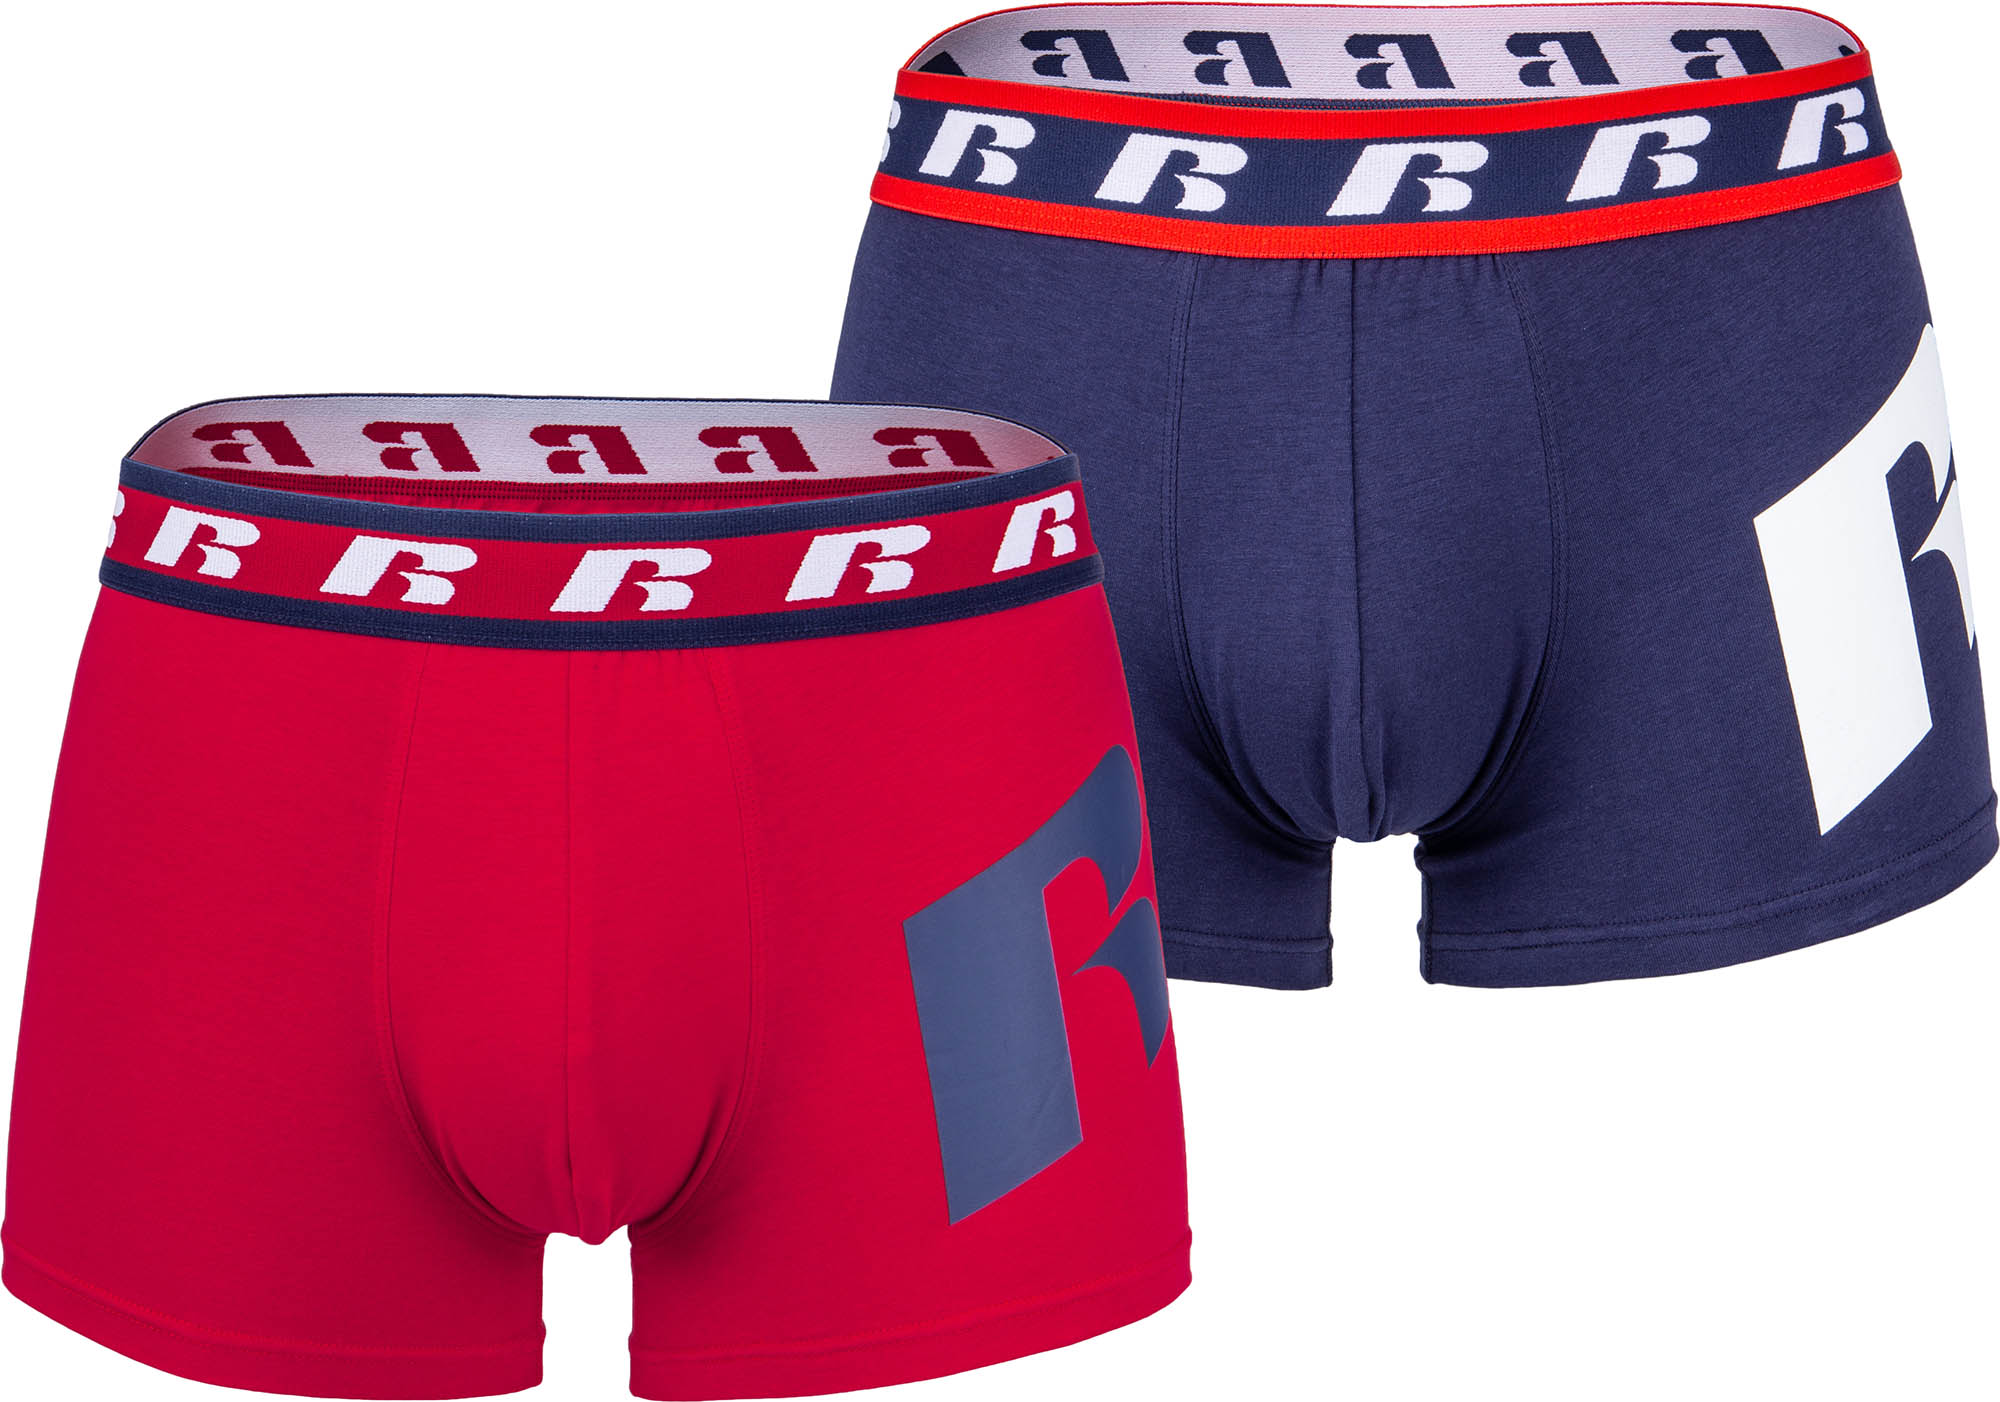 https://i.sportisimo.com/products/images/1139/1139103/full/russell-athletic-tyron-p-boxers_0.JPG